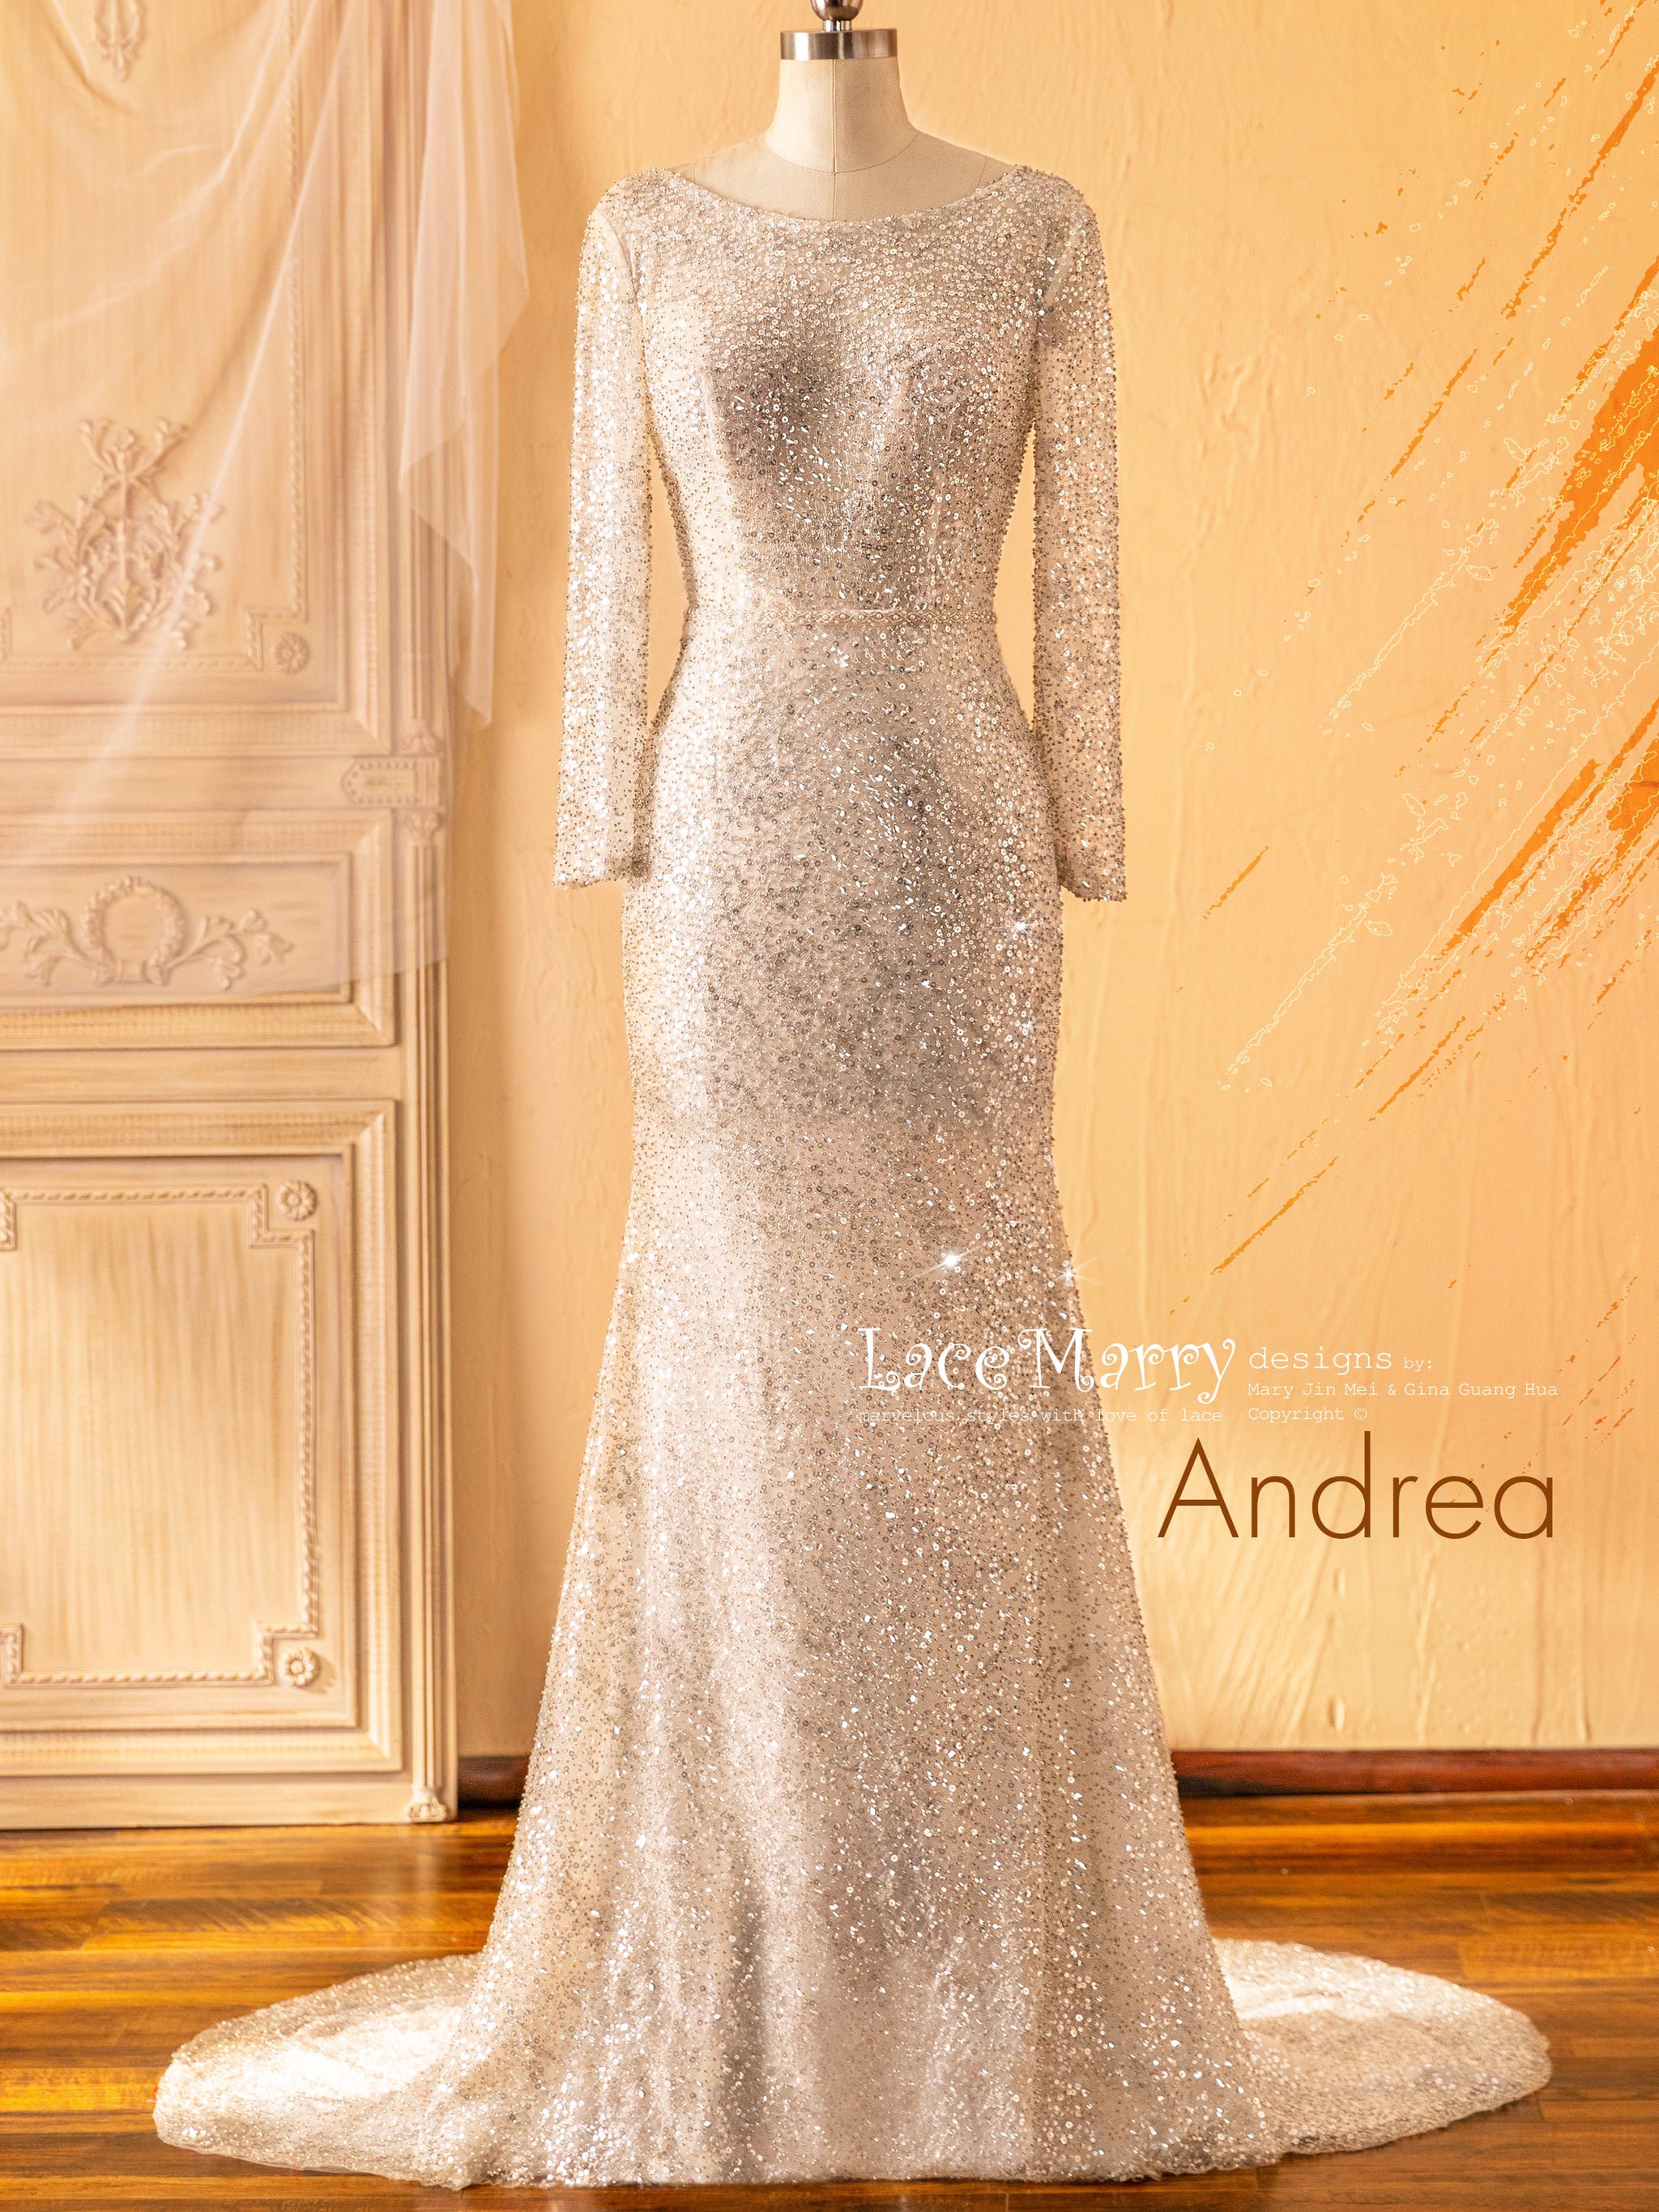 ANDREA / Long Sleeve Sparkling Sequin Wedding Dress with Open Back